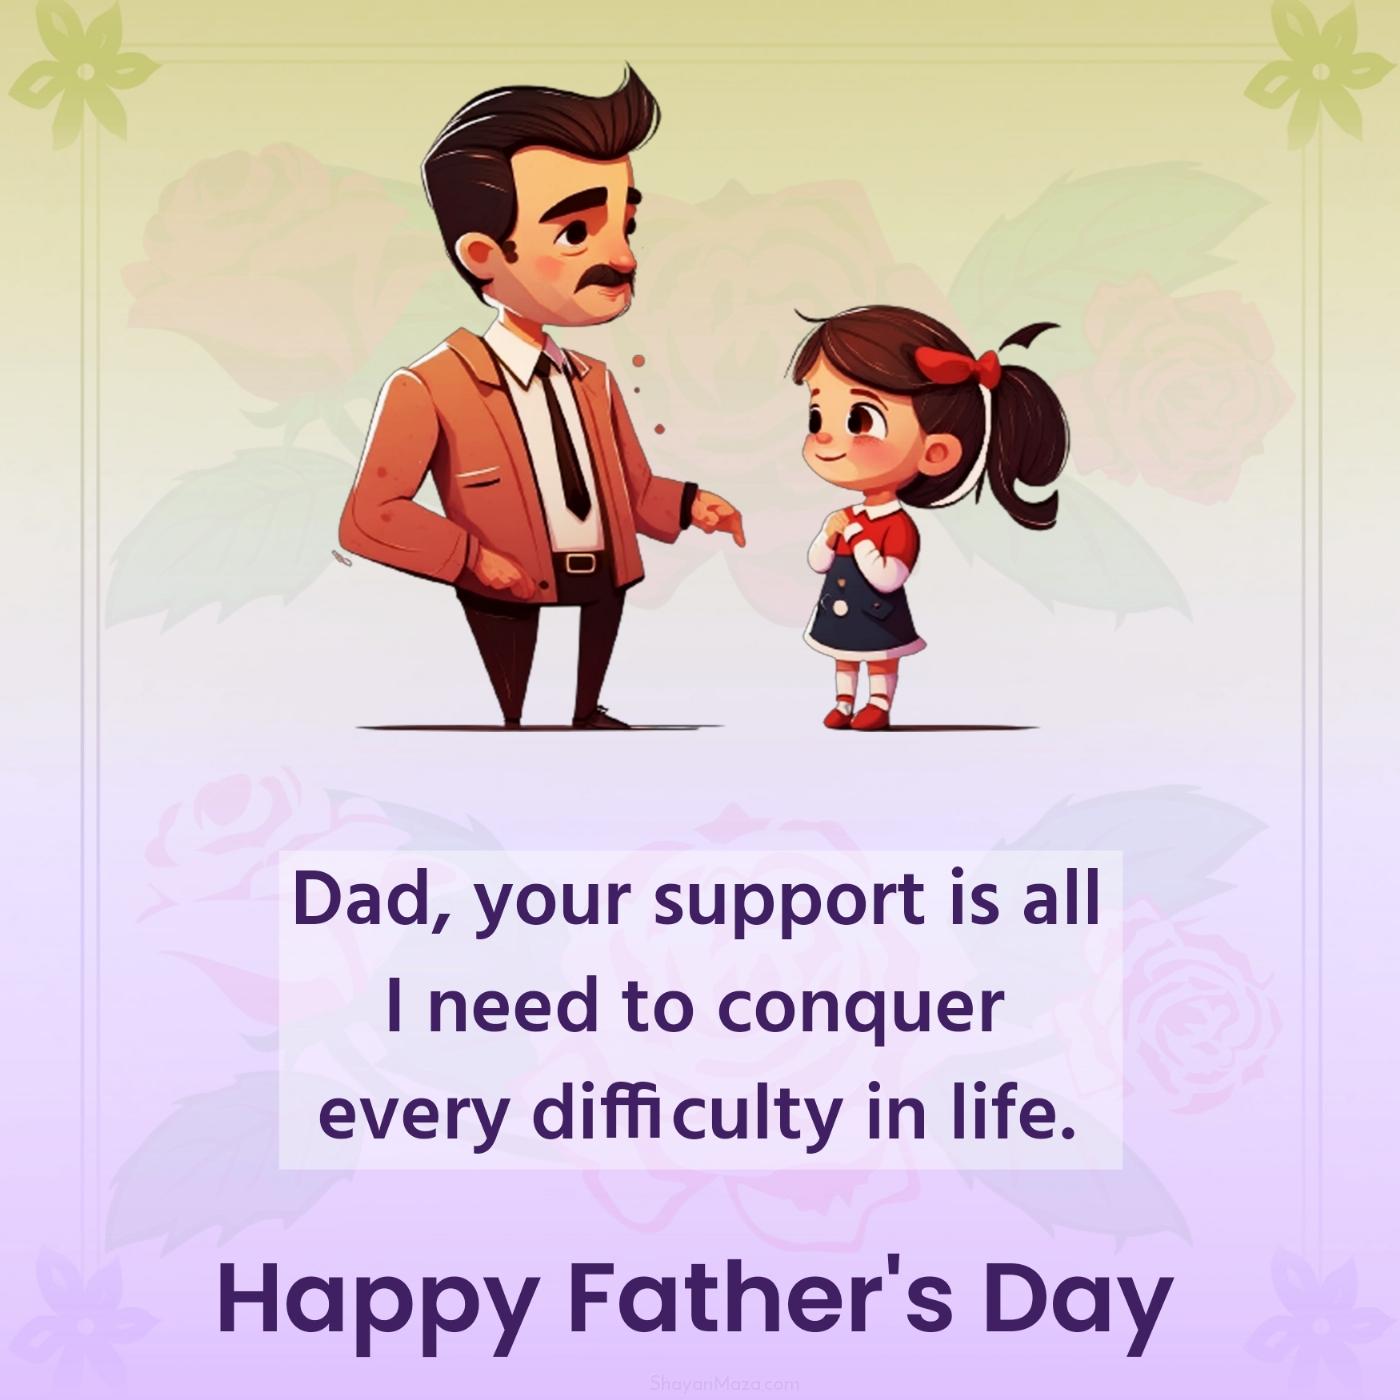 Dad your support is all I need to conquer every difficulty